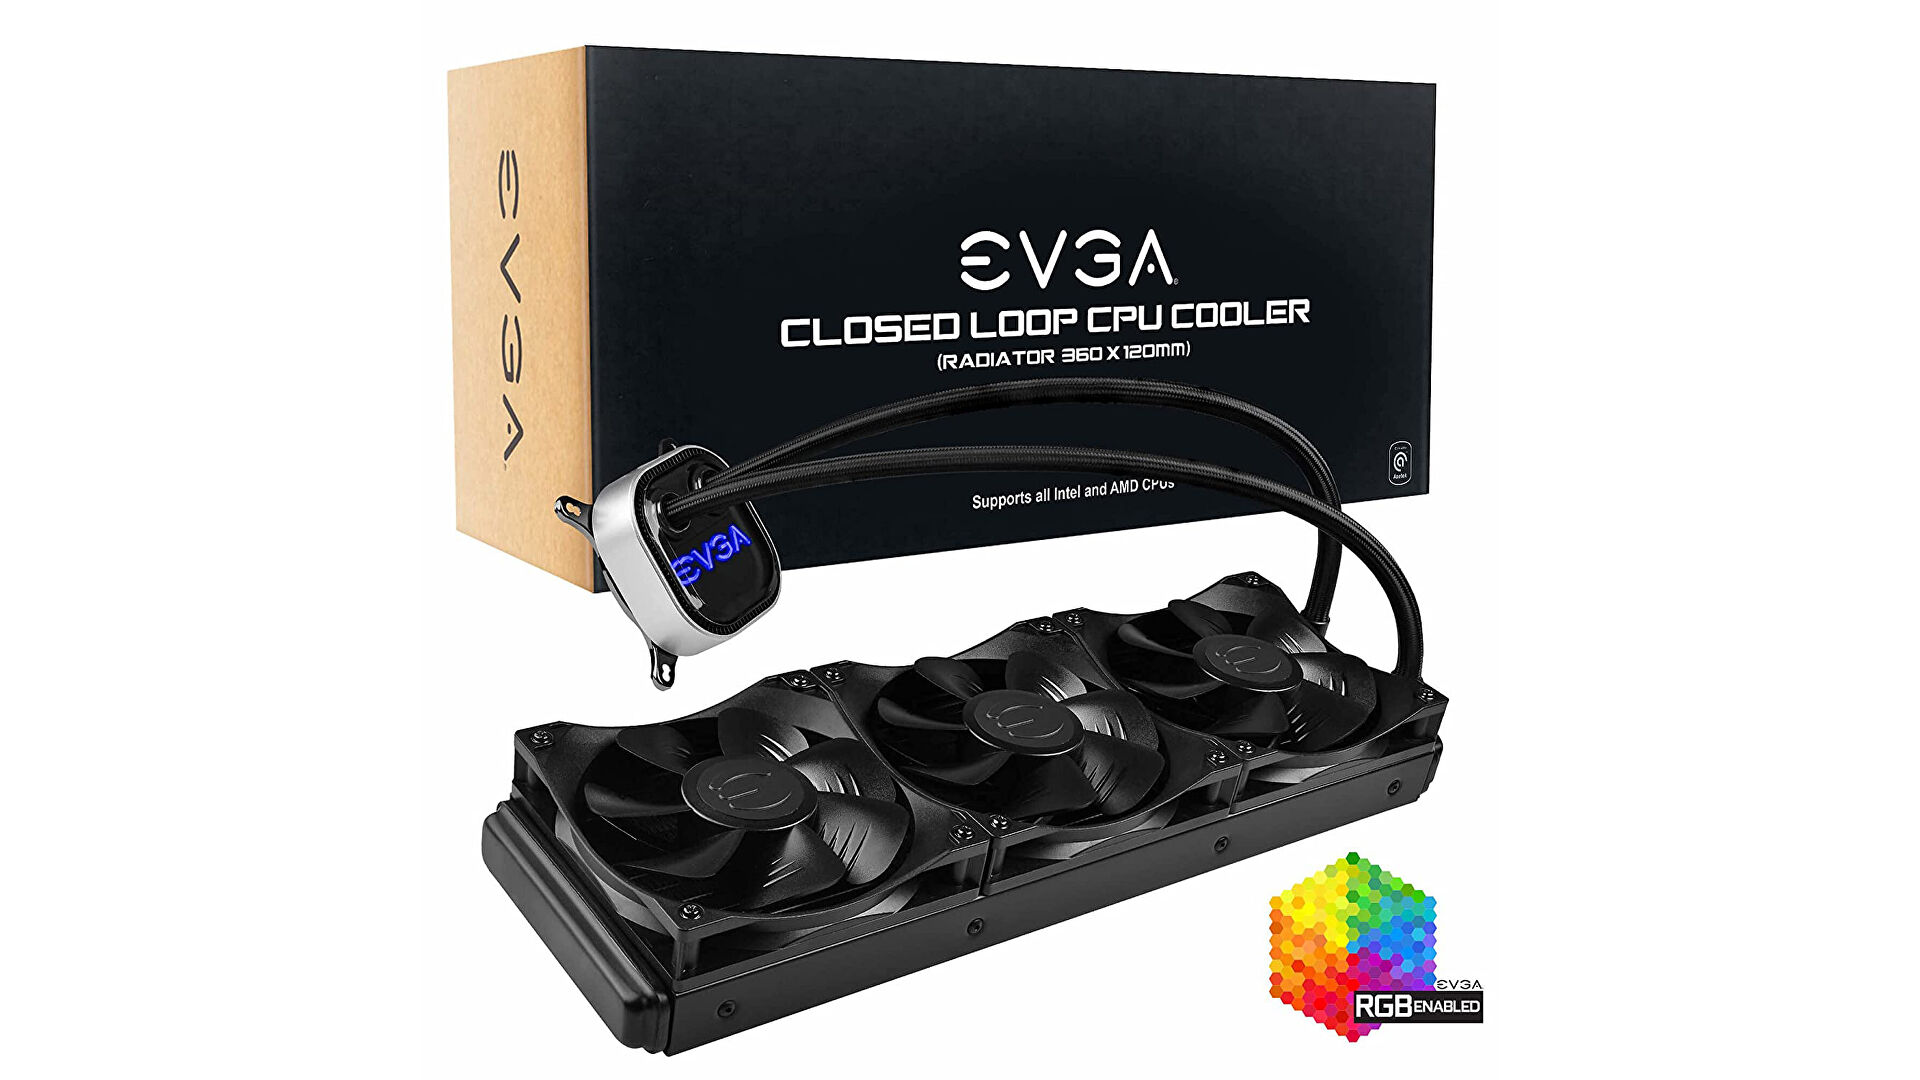 Pick up an EVGA 360mm AiO for £82 after a 25% discount on Amazon